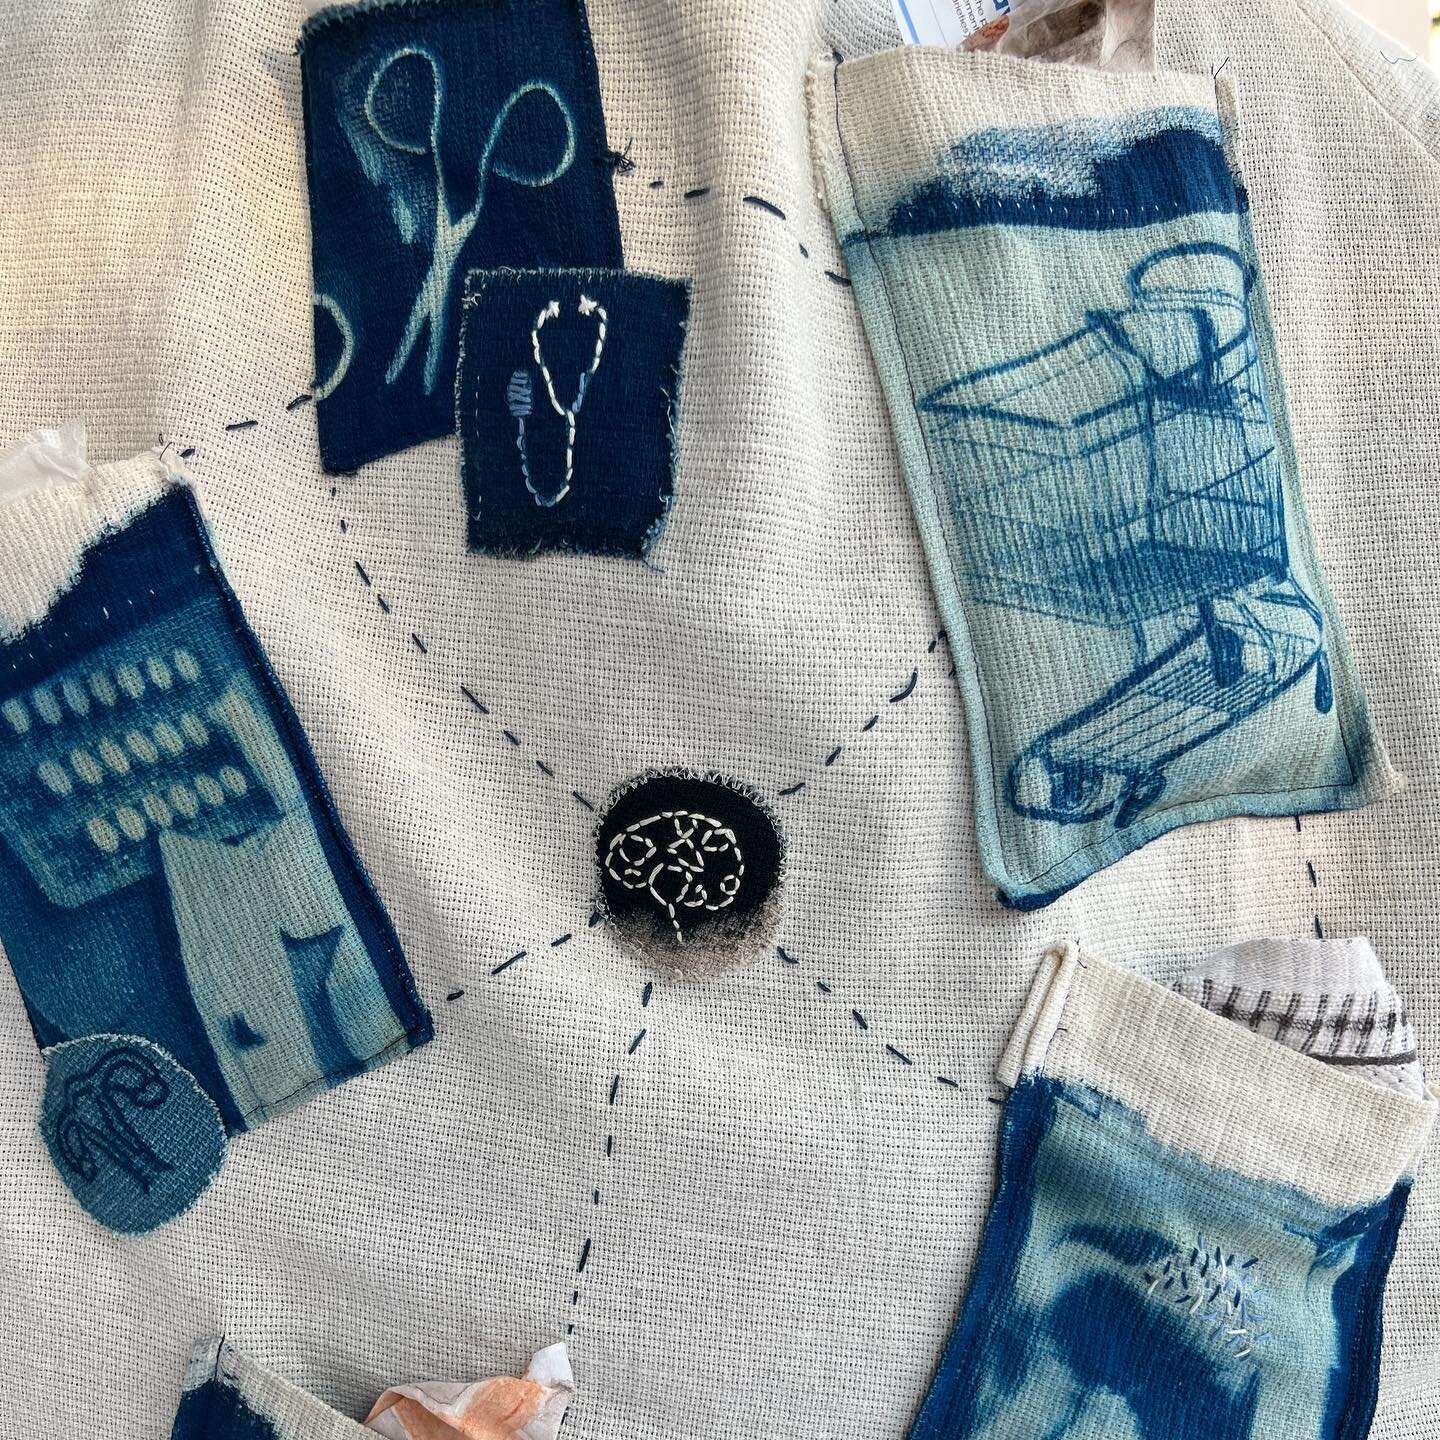 Details of &ldquo;The Care We Carry&rdquo; by Lynne Muth. 

8 days until @designcoredet &lsquo;s Kick Off party. Join The FET!SH Project at Spot Lite from 7 PM - 10 PM on Thursday, September 1st! #detroitmonthofdesign